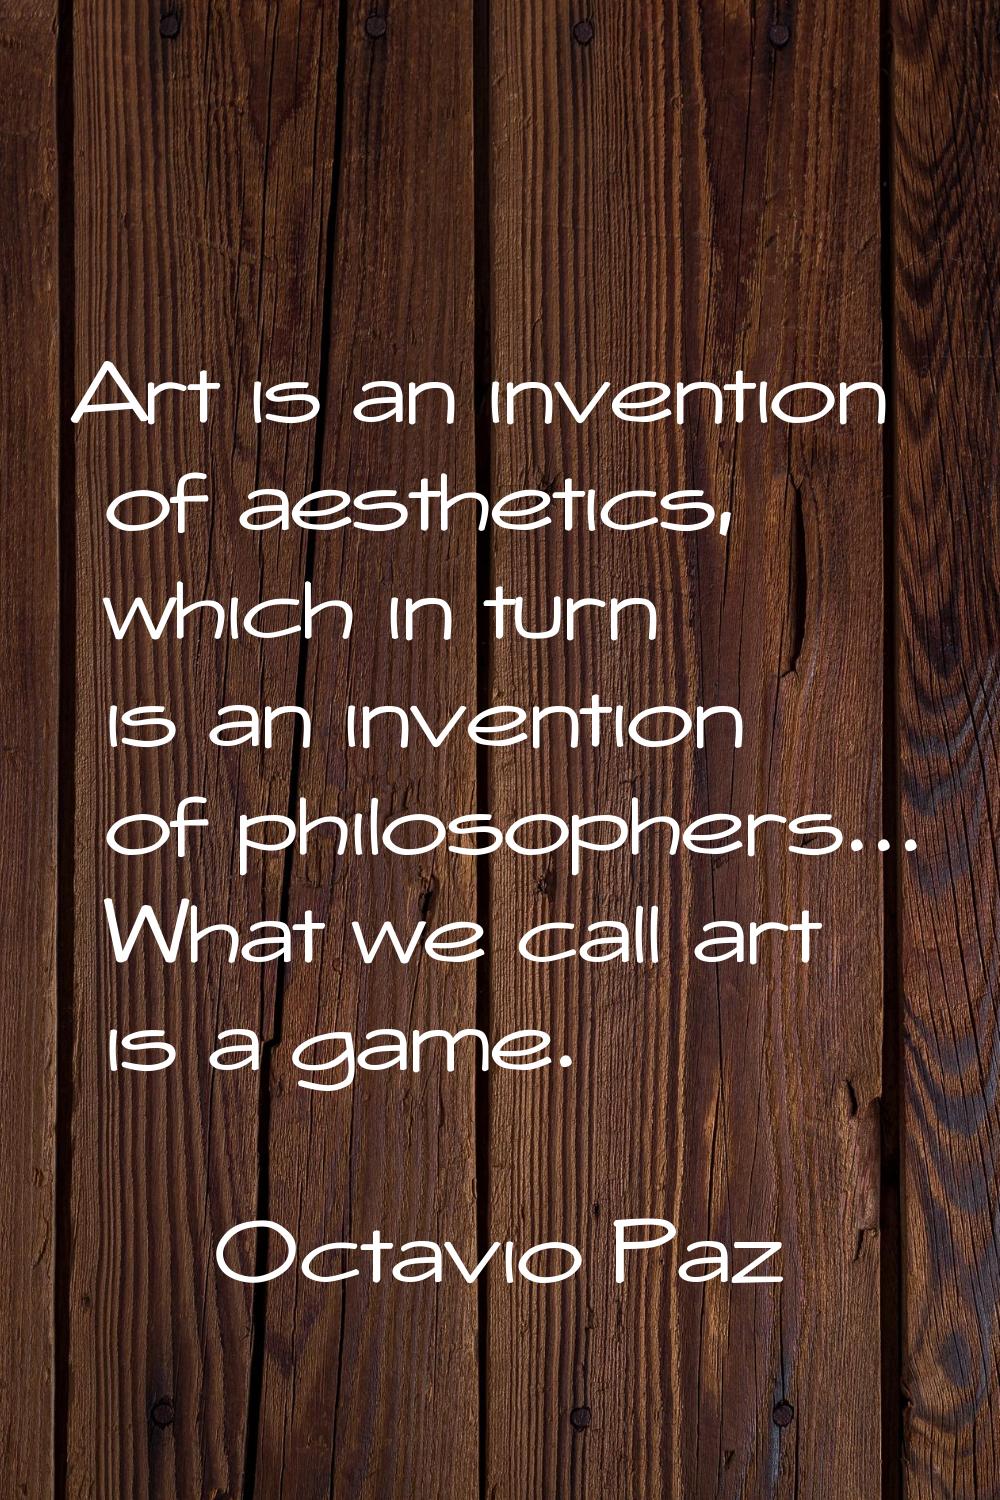 Art is an invention of aesthetics, which in turn is an invention of philosophers... What we call ar